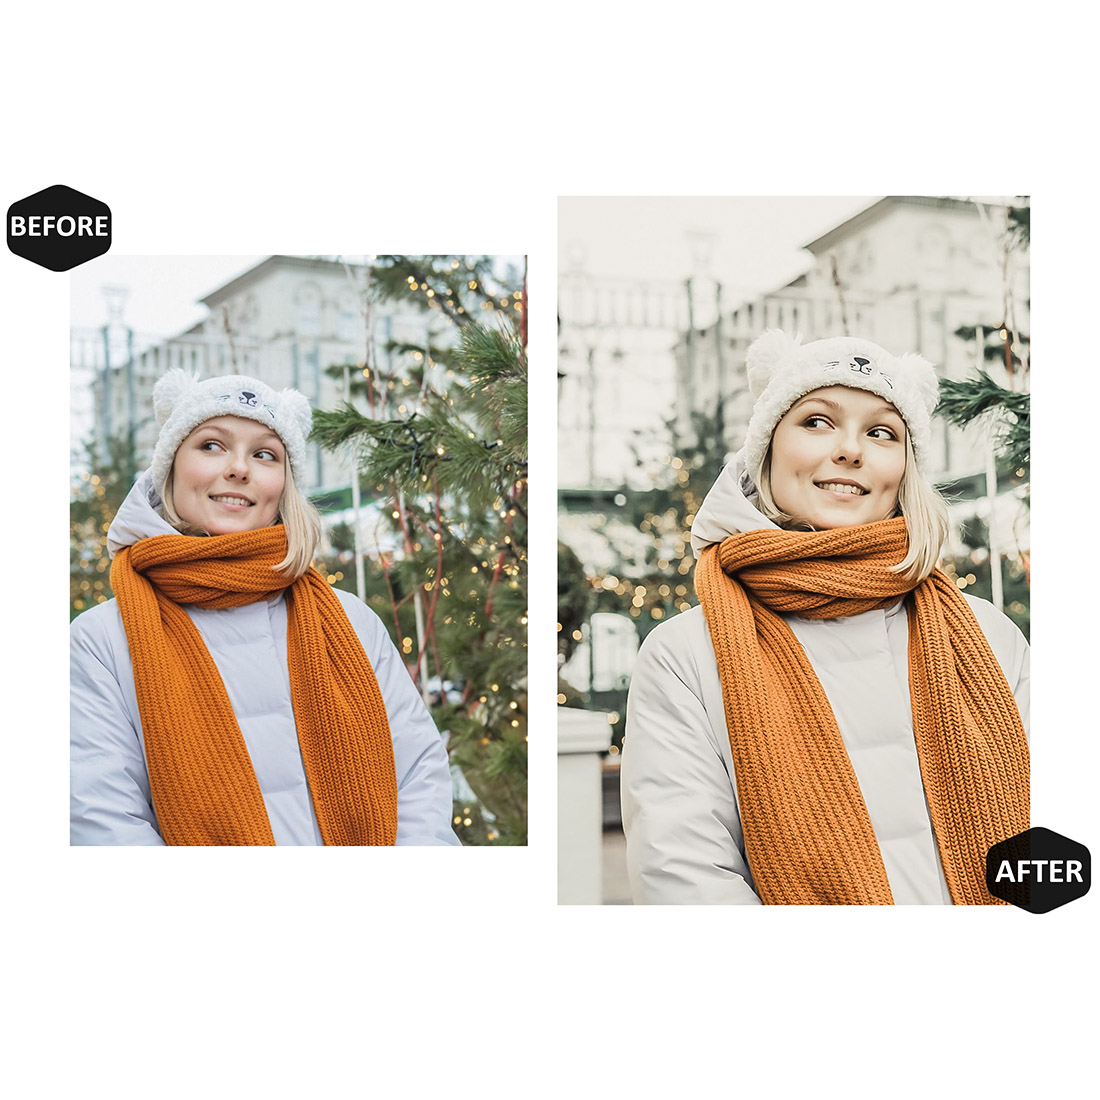 12 Photoshop Actions, A Memorable December Ps Action, Christmas ACR Preset, Holiday Ps Filter, Atn Portrait And Lifestyle Theme For Instagram, Blogger preview image.